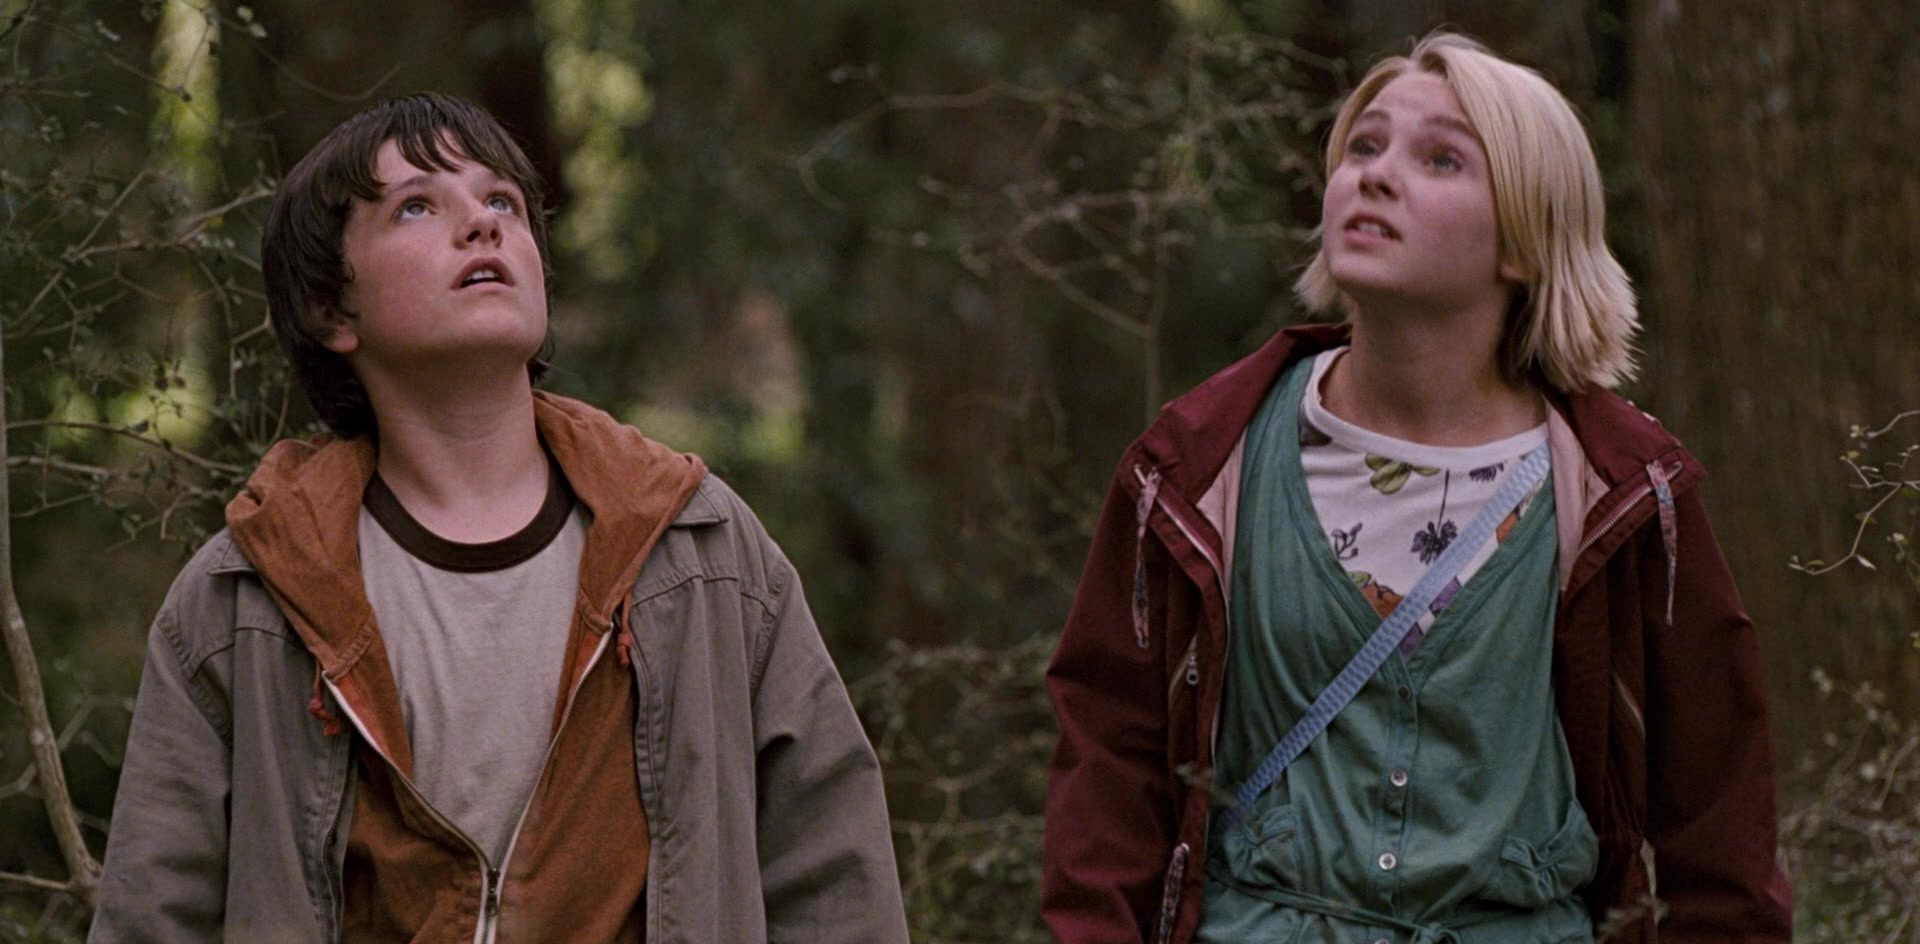 Is Bridge to Terabithia Inspired by a True Story or a Novel?